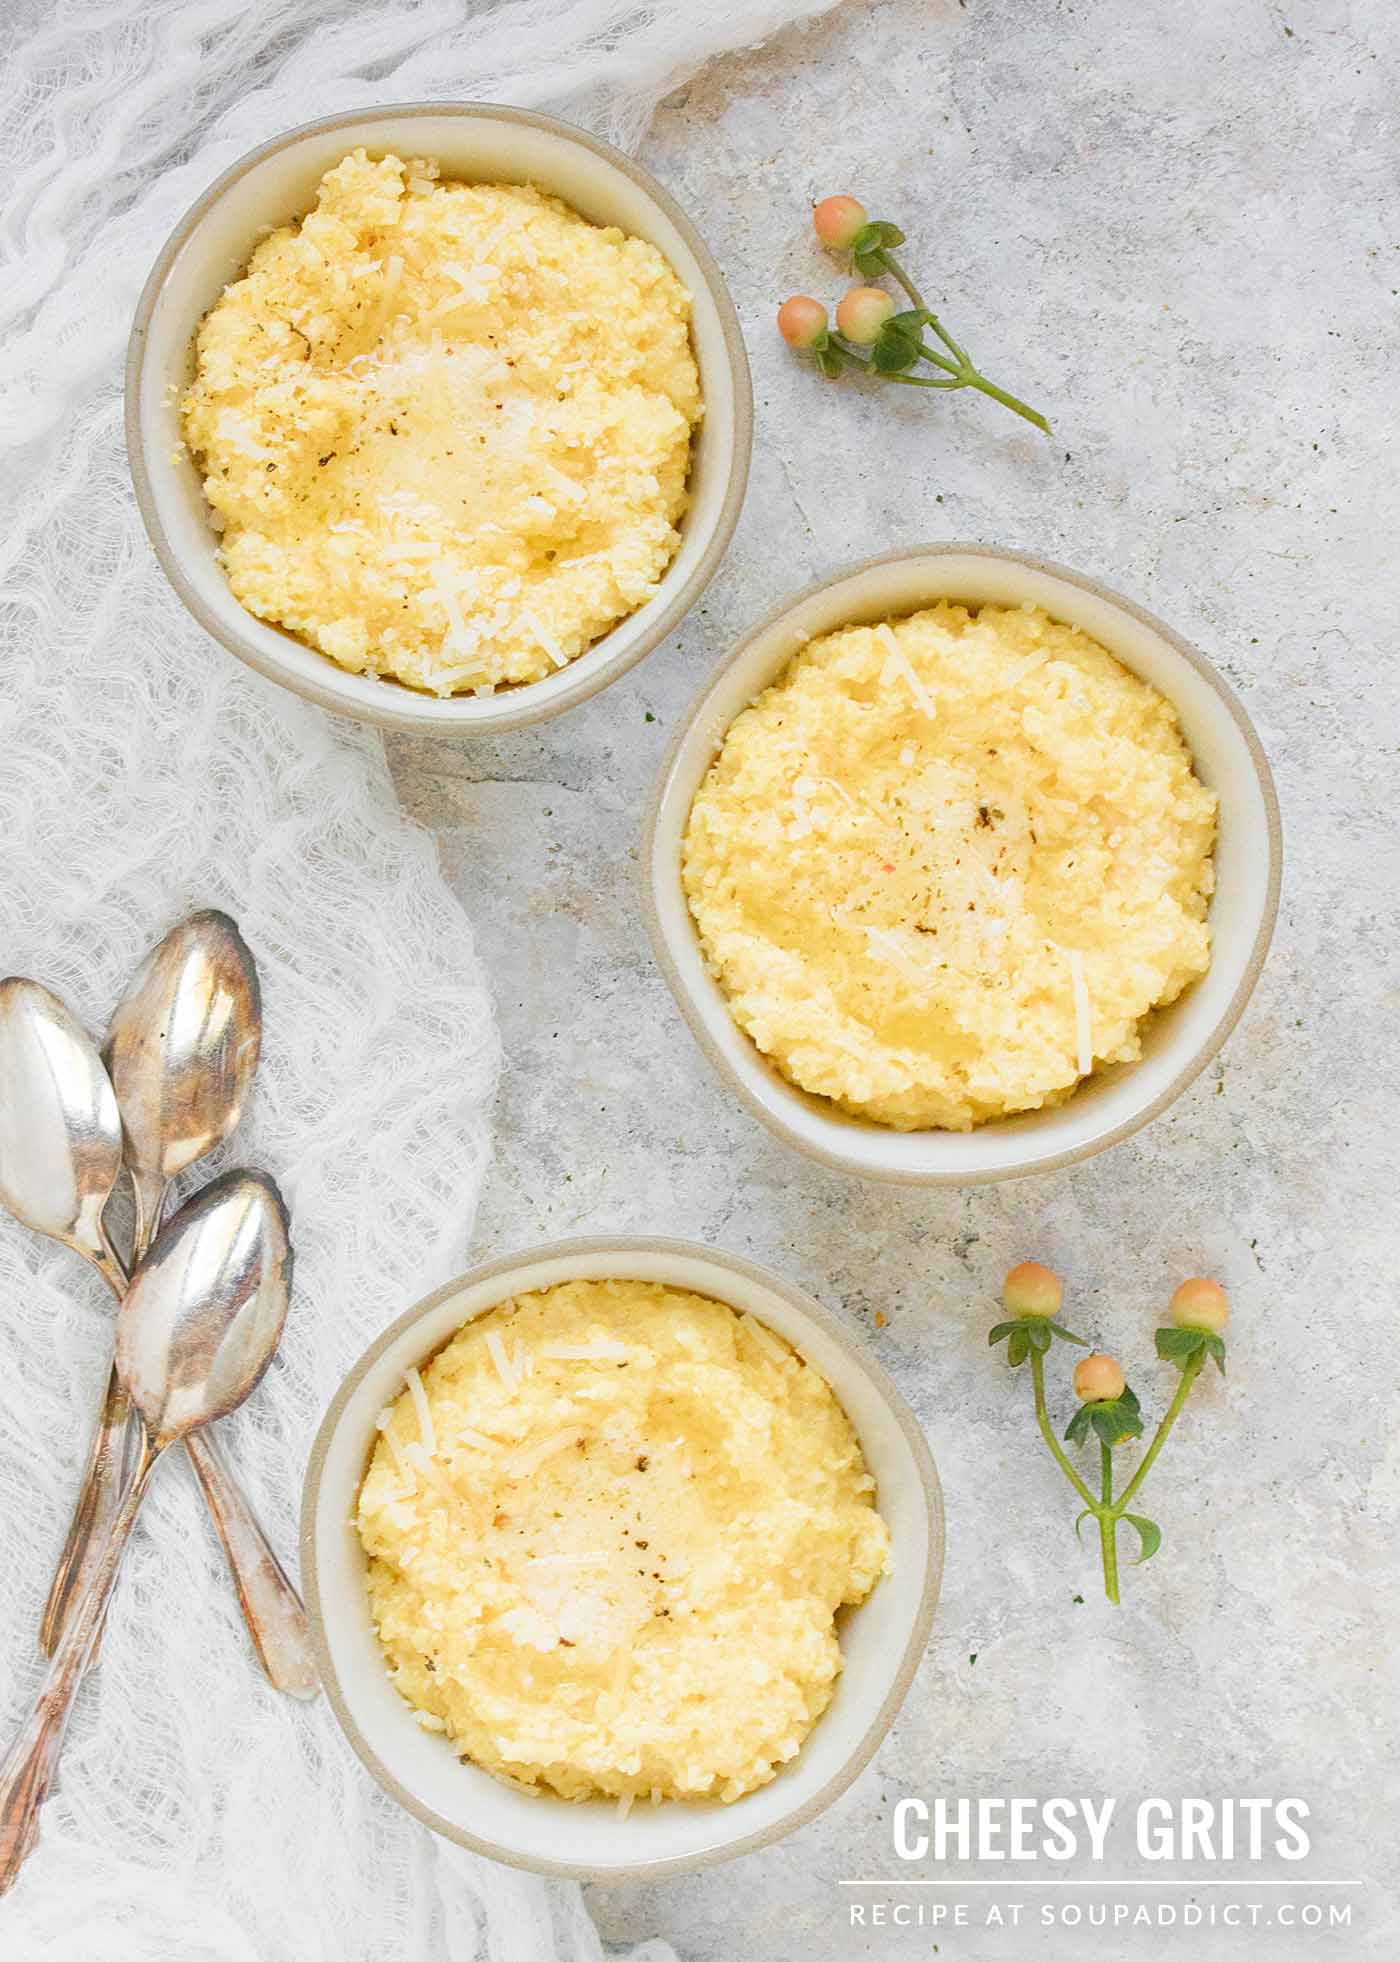 Three small bowls of cheese grits, with spoons on the side